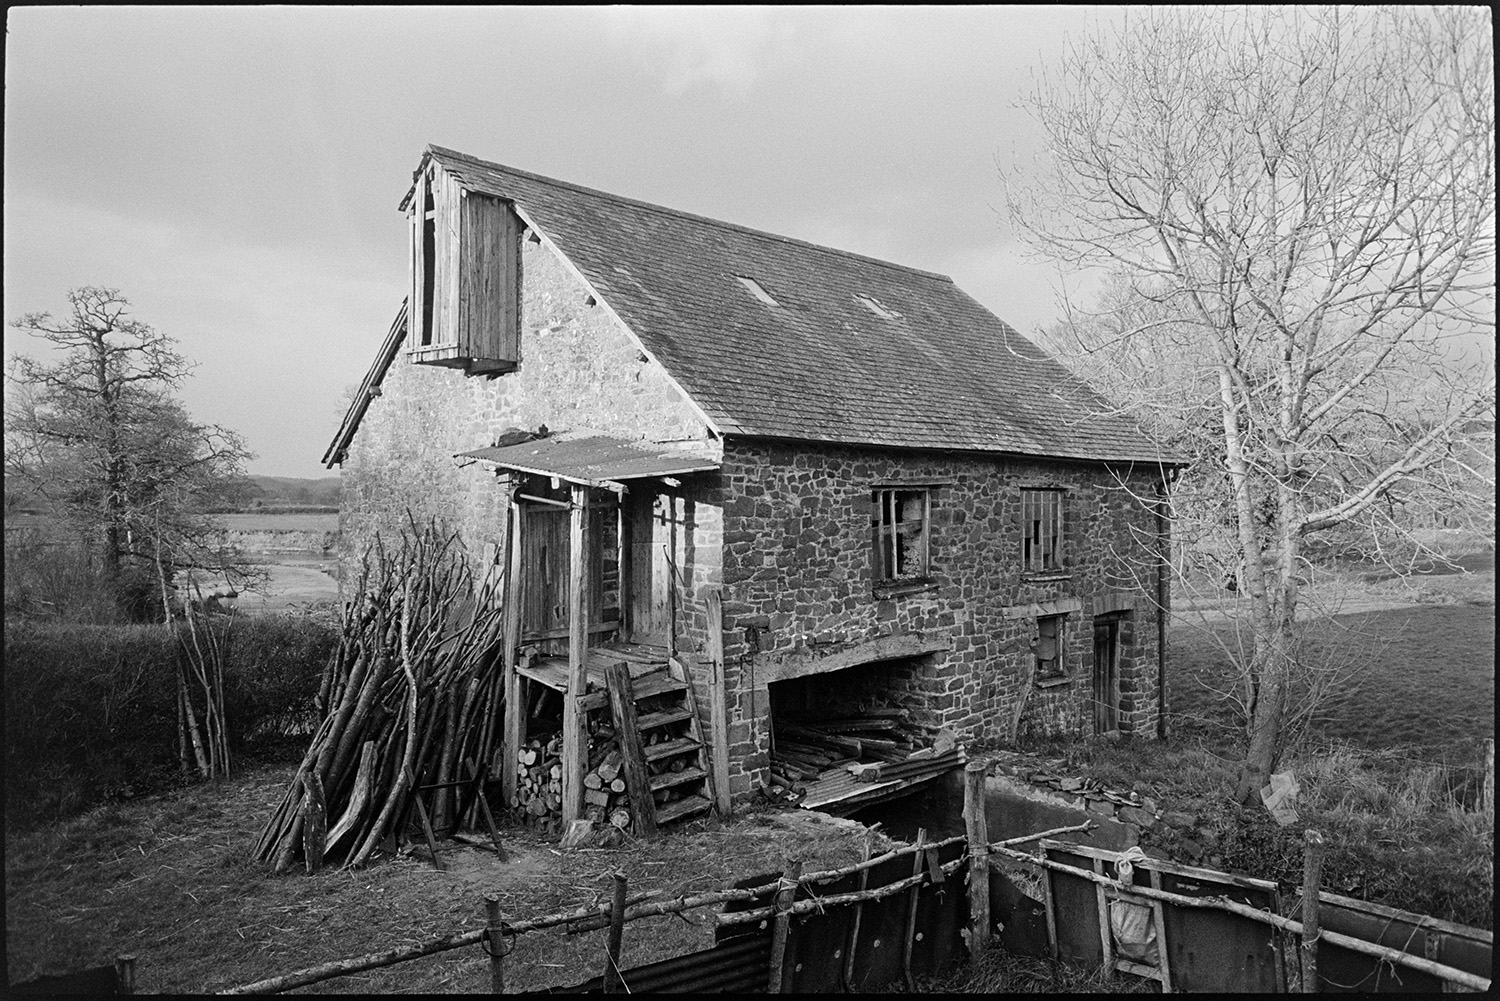 Mill building with woodpile,
[Rashleigh Mill, Ashreigney with a woodpile leaning against the wall. The stone mill building is surrounded by trees and fields.]